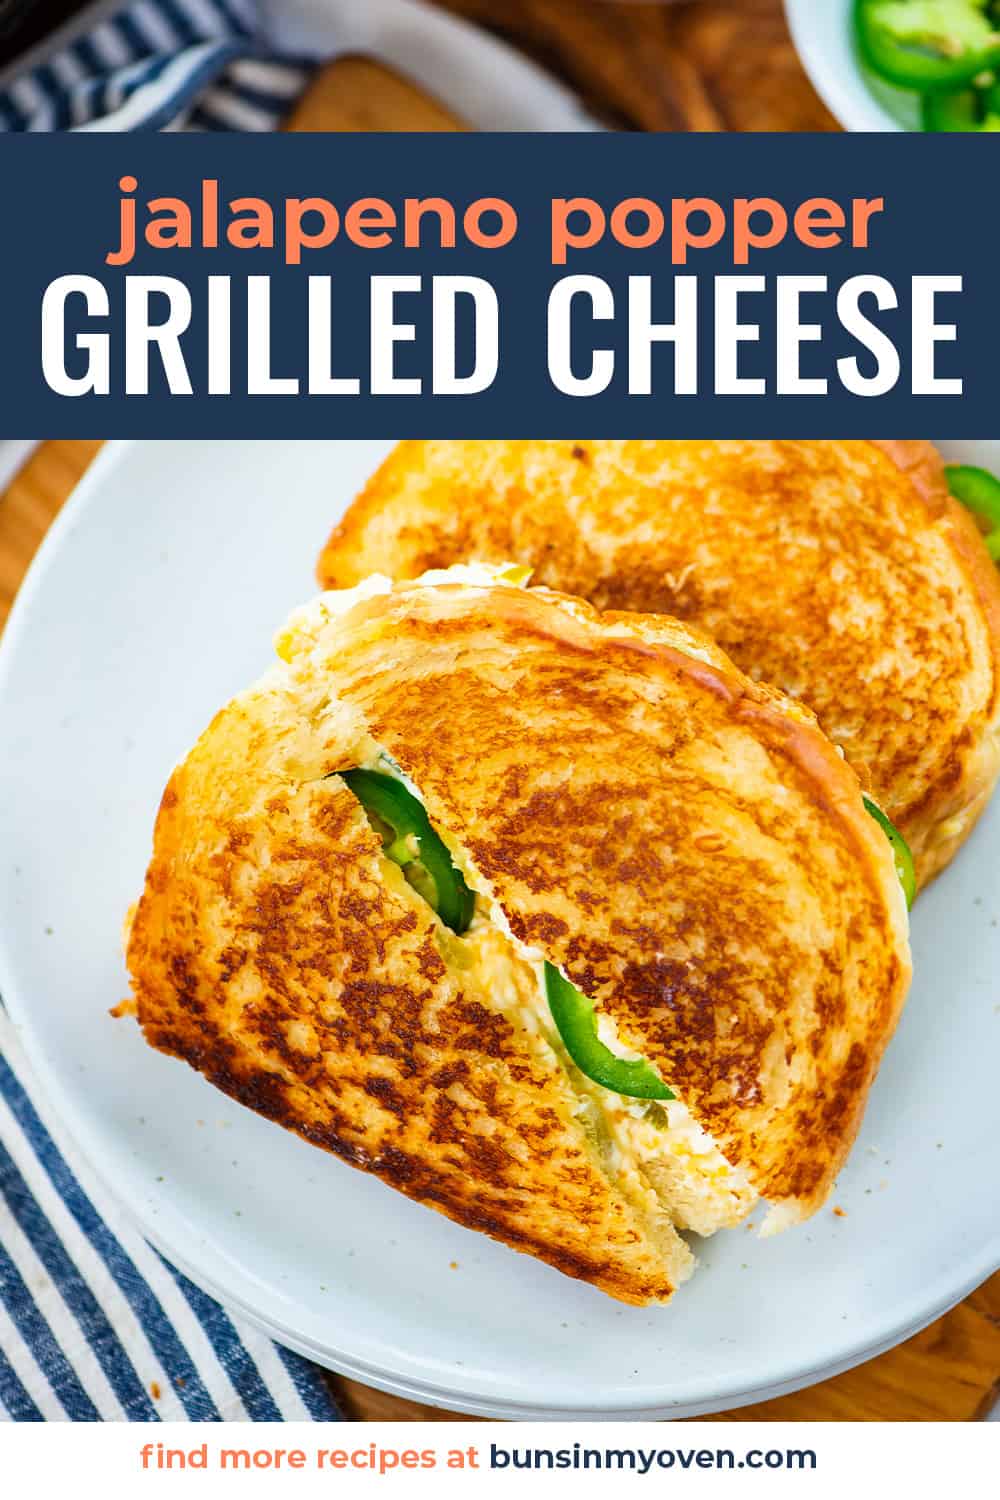 Jalapeno popper grilled cheese on plate.